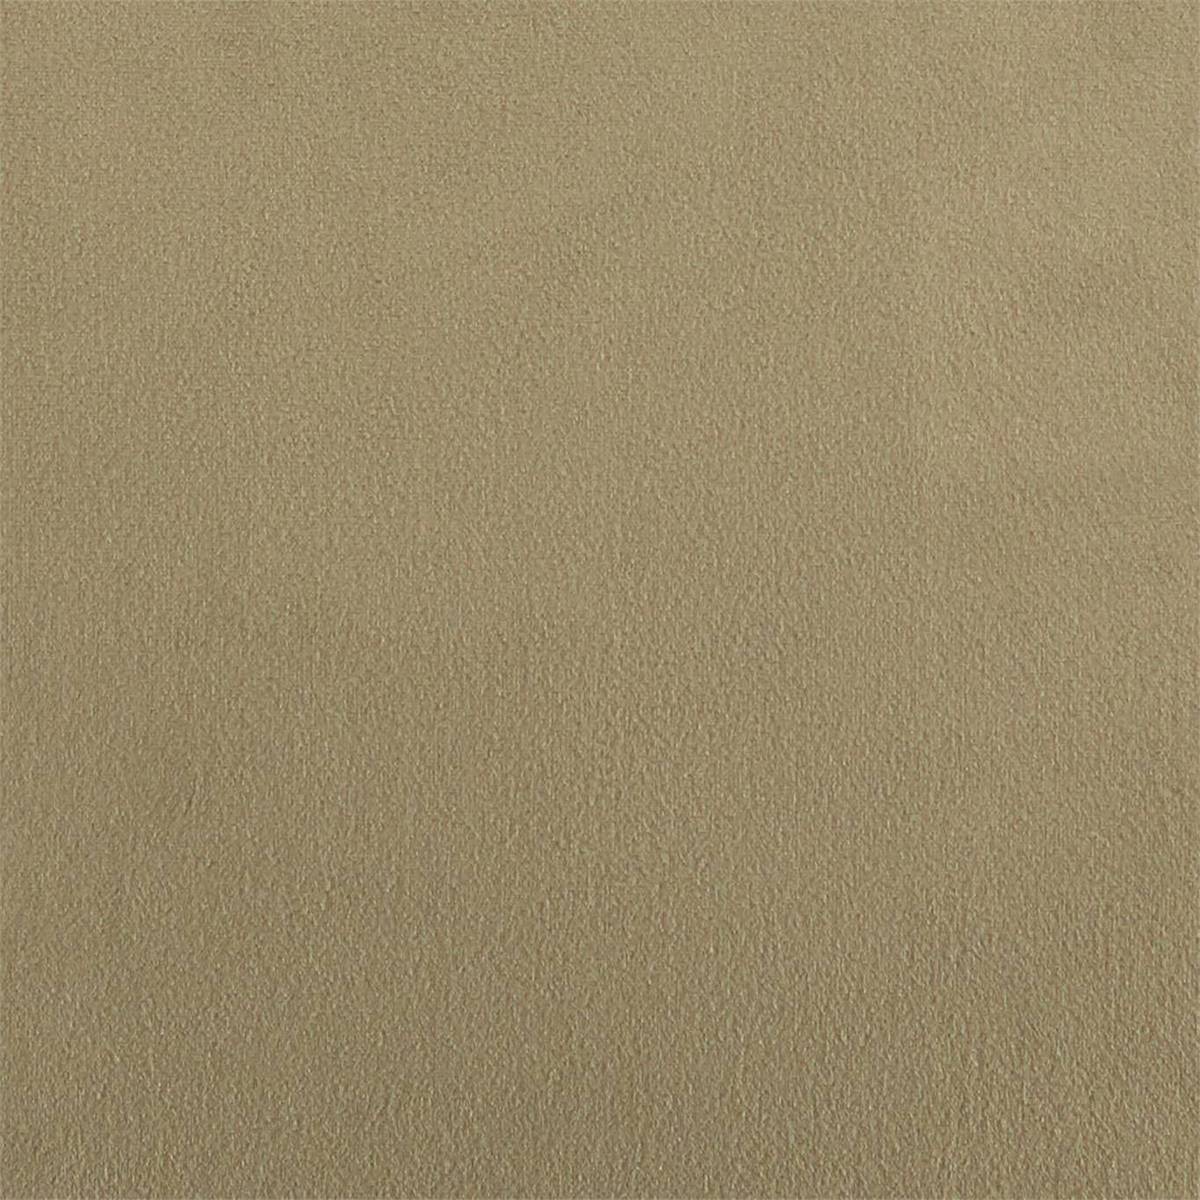 Zephyr Plain Parchment Fabric by Zoffany